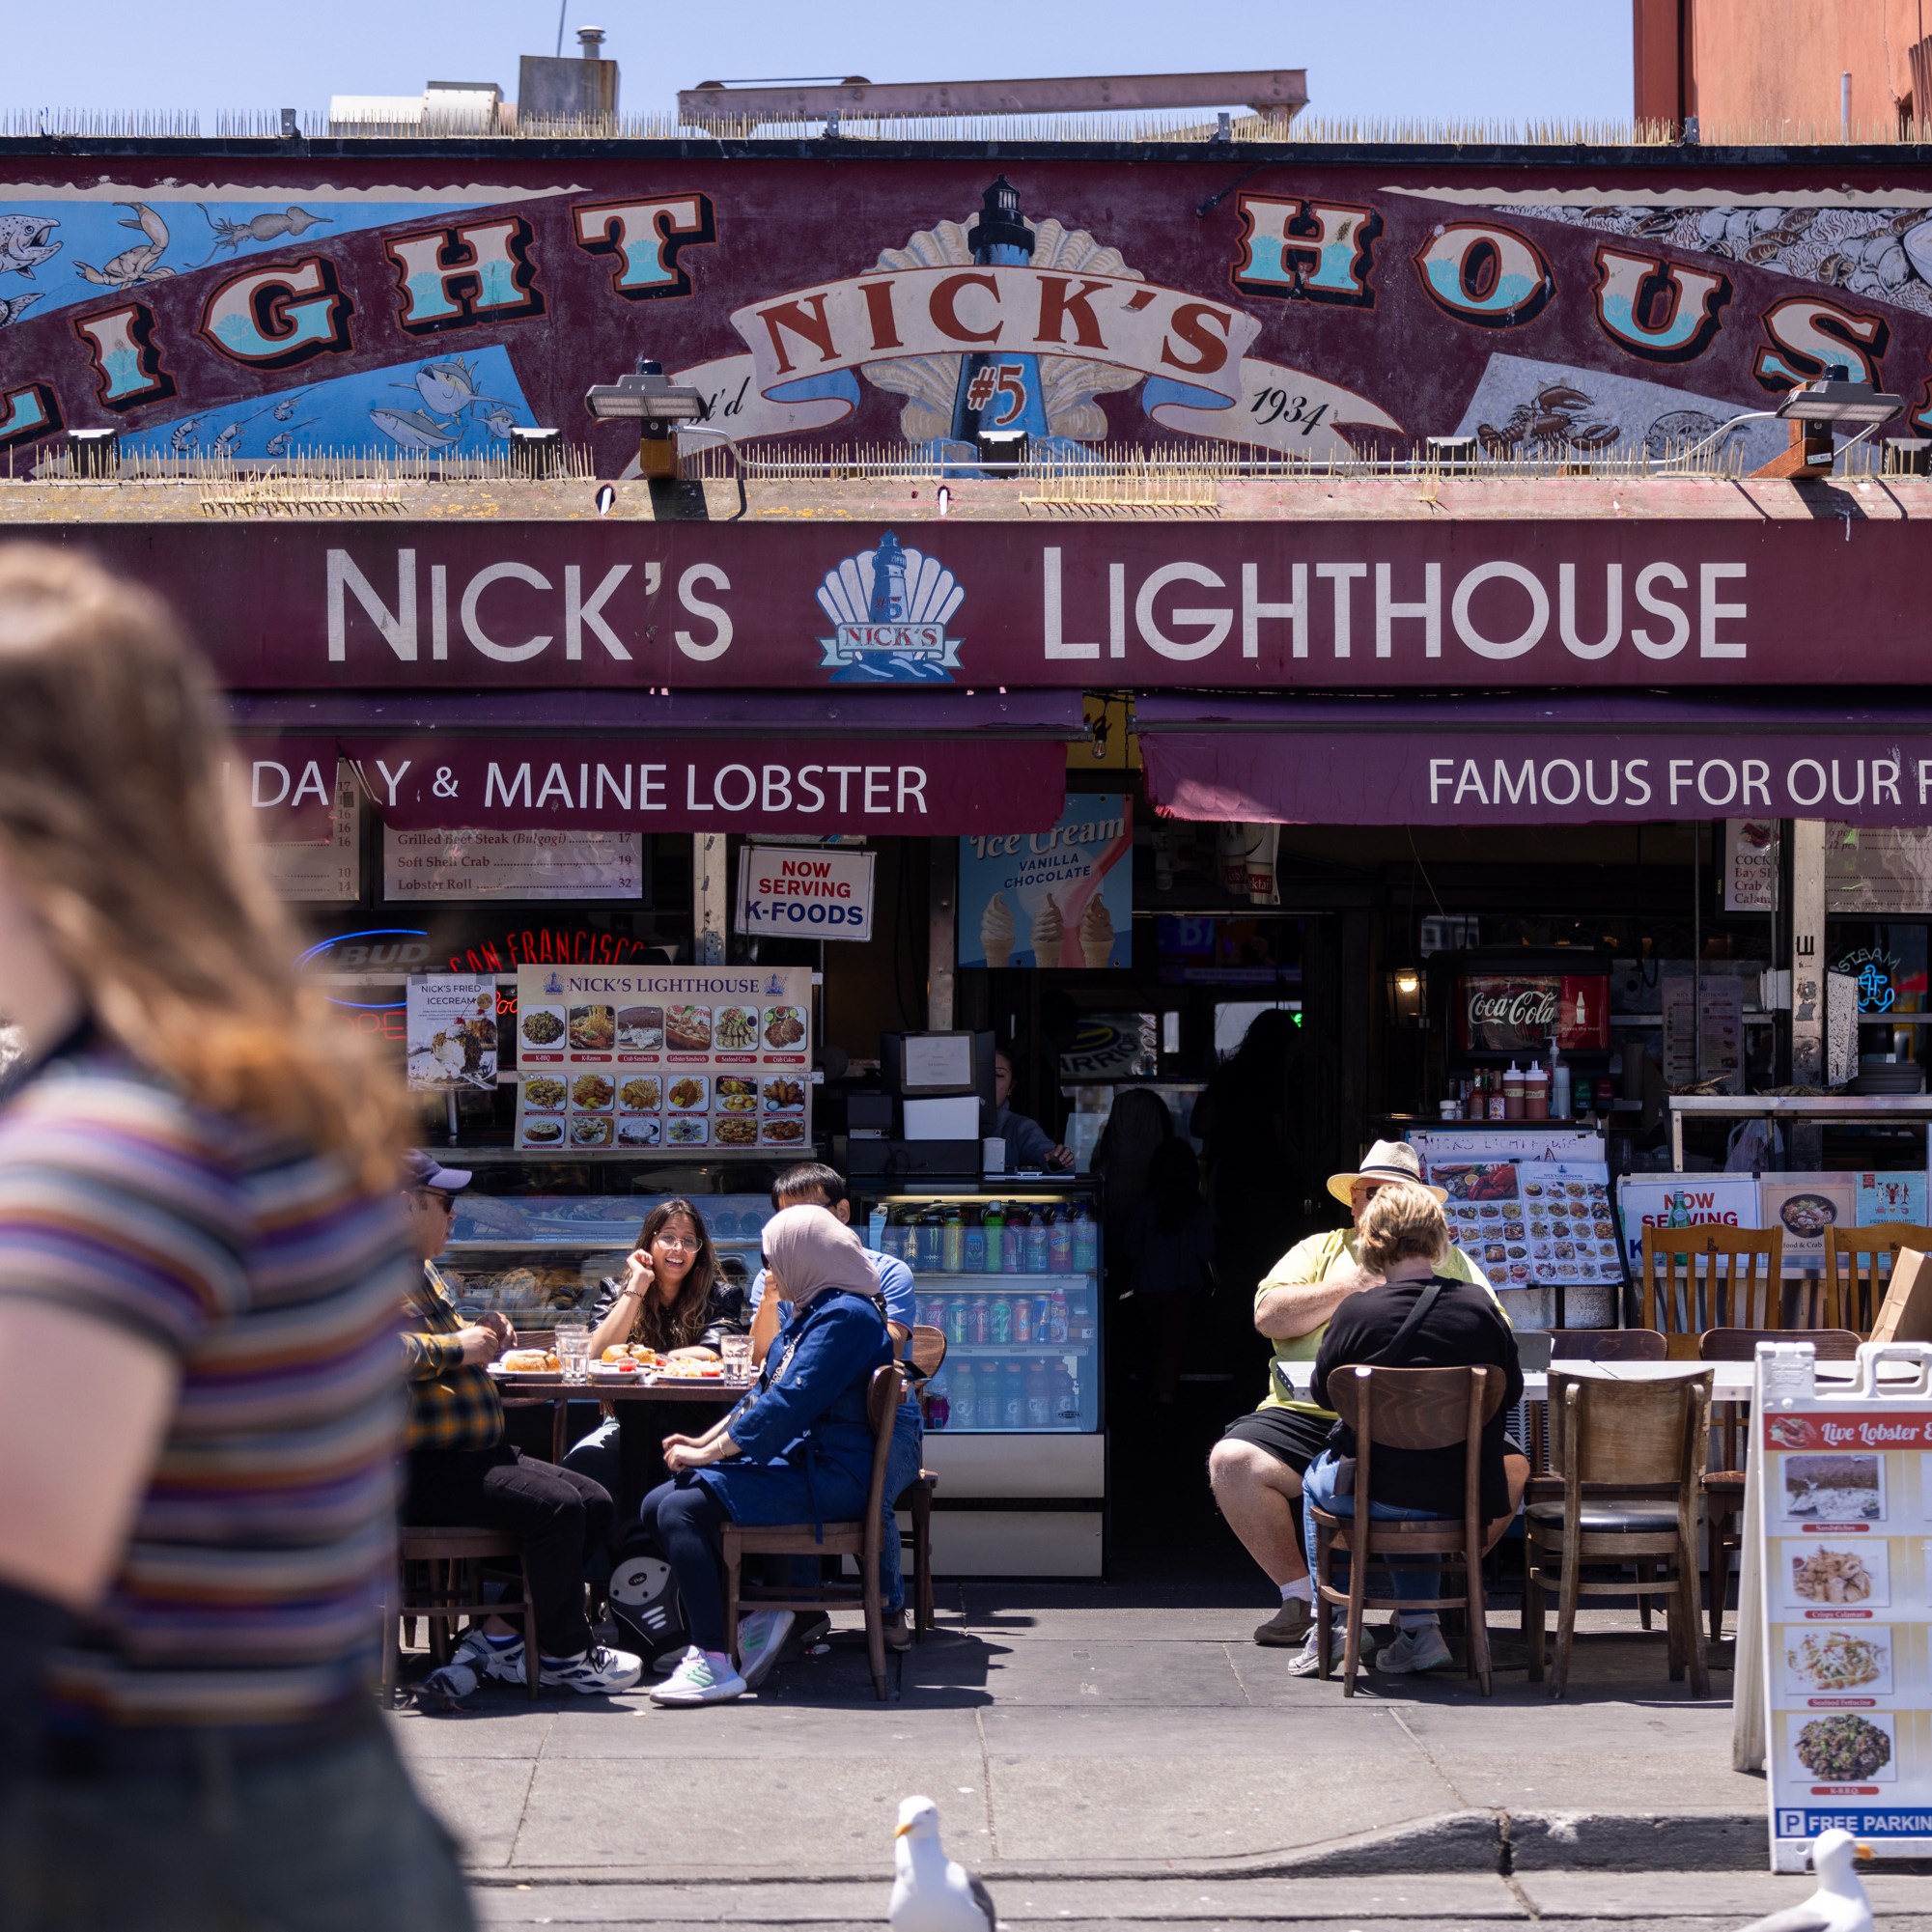 This image shows the exterior of Nick's Lighthouse restaurant, with its maroon canopy displaying its name. People are dining outside on a sunny day, enjoying seafood dishes.